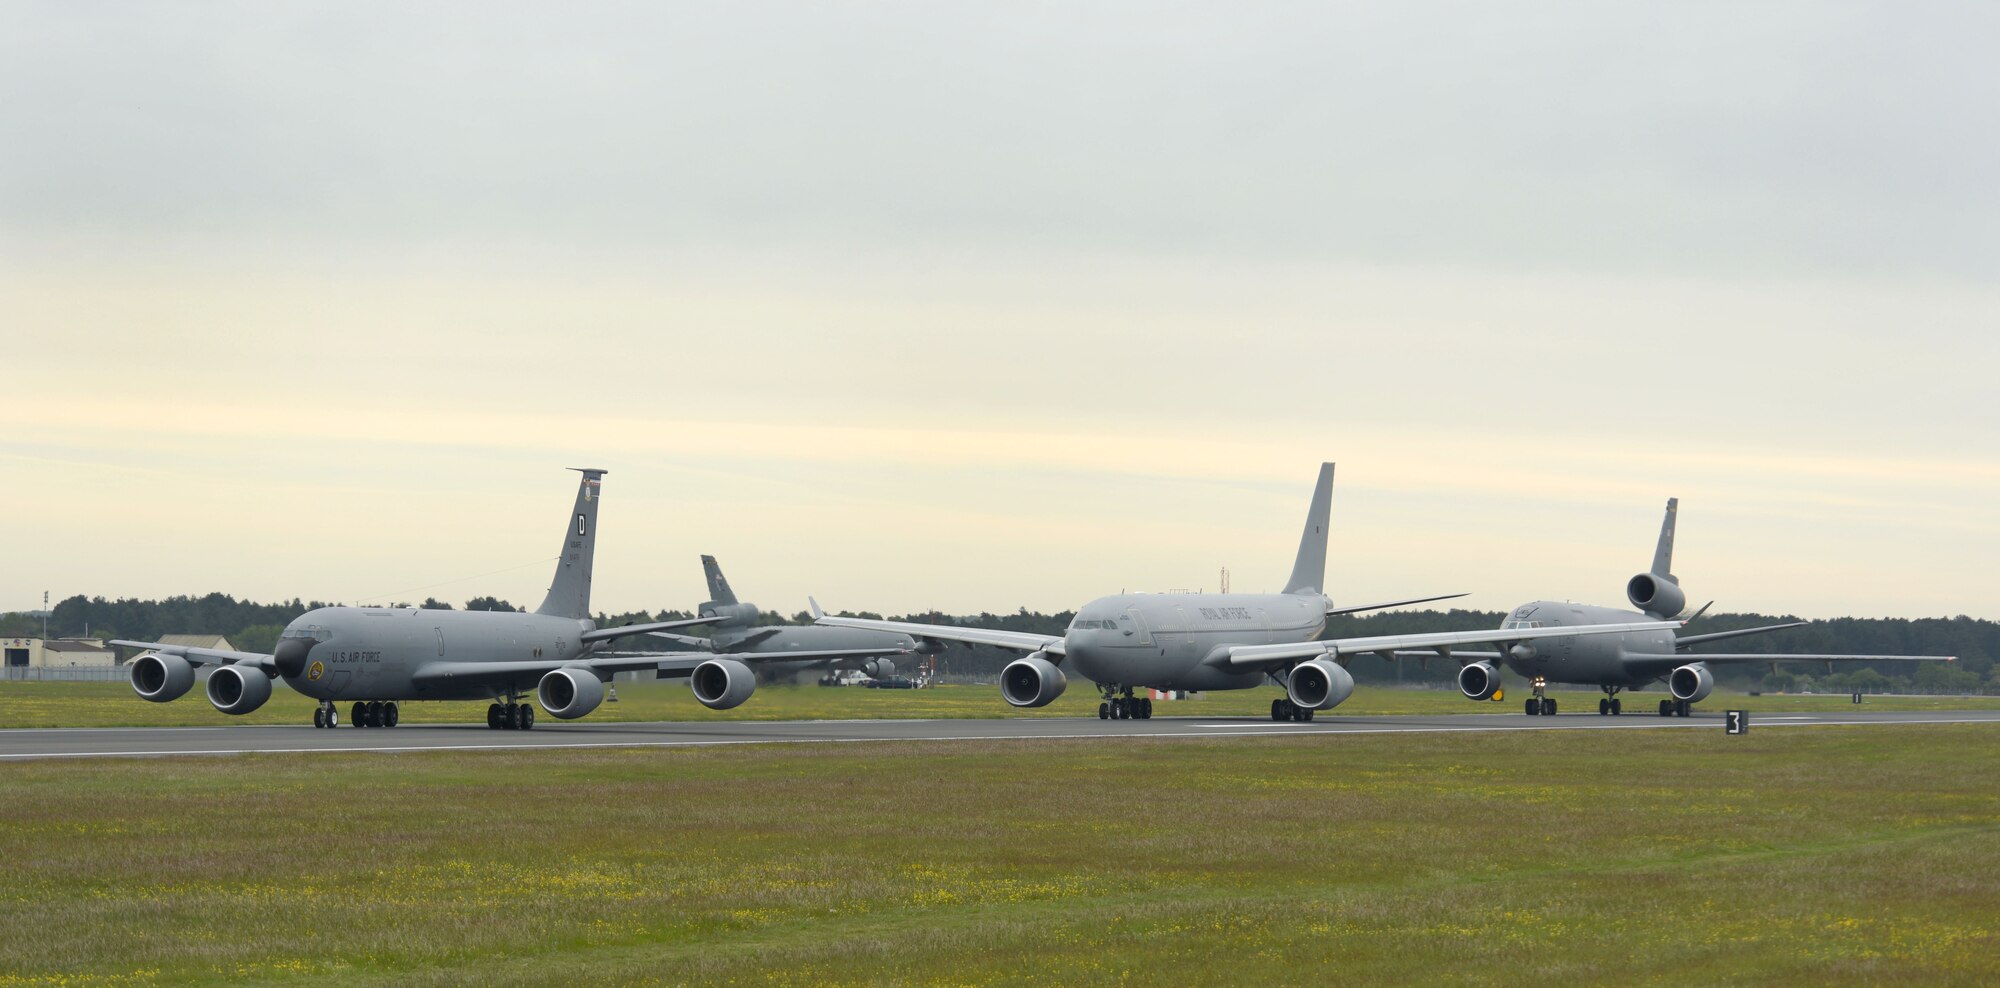 A U.S. Air Force KC-135 Stratotanker, Royal Air Force A330 Voyager and U.S. Air Force KC-10 Extender aircraft perform an “elephant walk” down the runway May 20, 2021, at RAF Mildenhall, England. The elephant walk, followed by a formation flight, was part of the European tanker Symposium which brings tanker crew from NATO countries, along with other U.S. and Canadian forces together to share experiences and knowledge. (U.S. Air Force photo by Karen Abeyasekere)